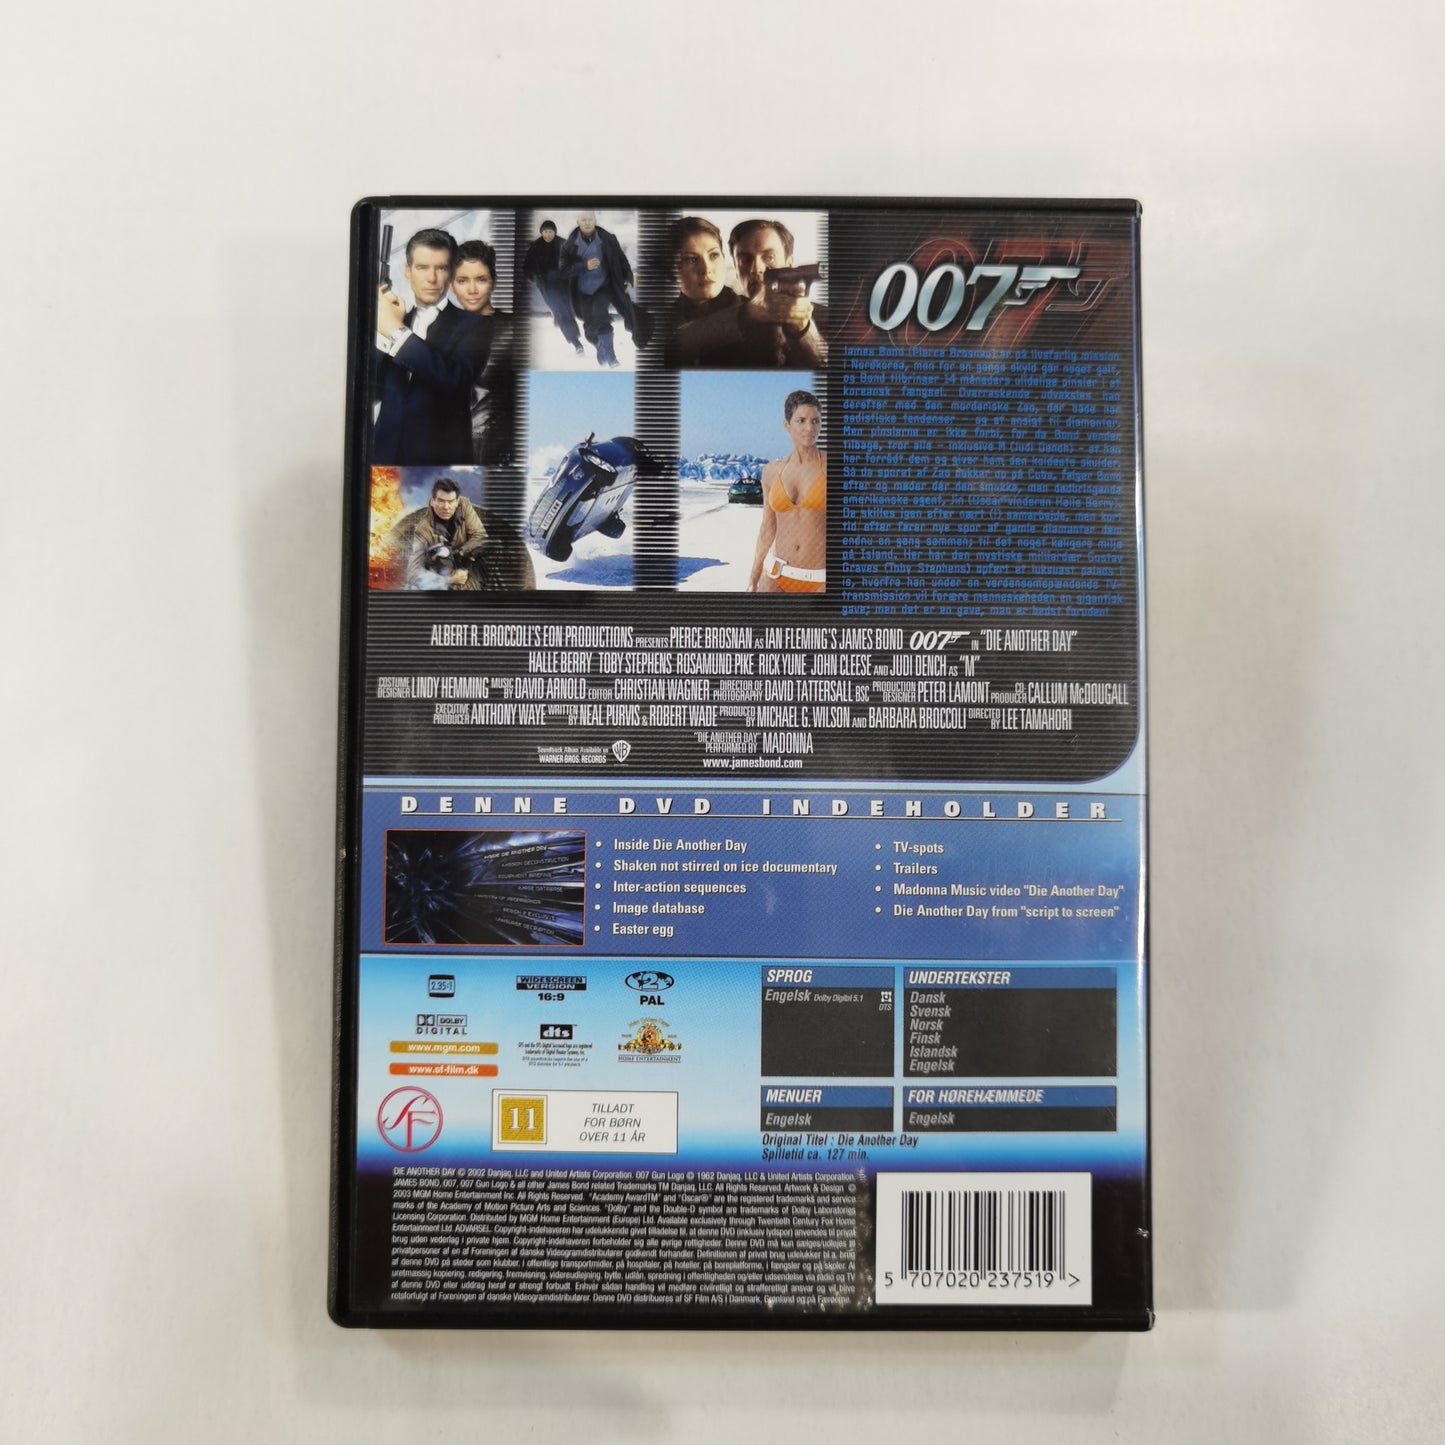 007: Die Another Day (2002) - DVD DK 2003 007 Collection